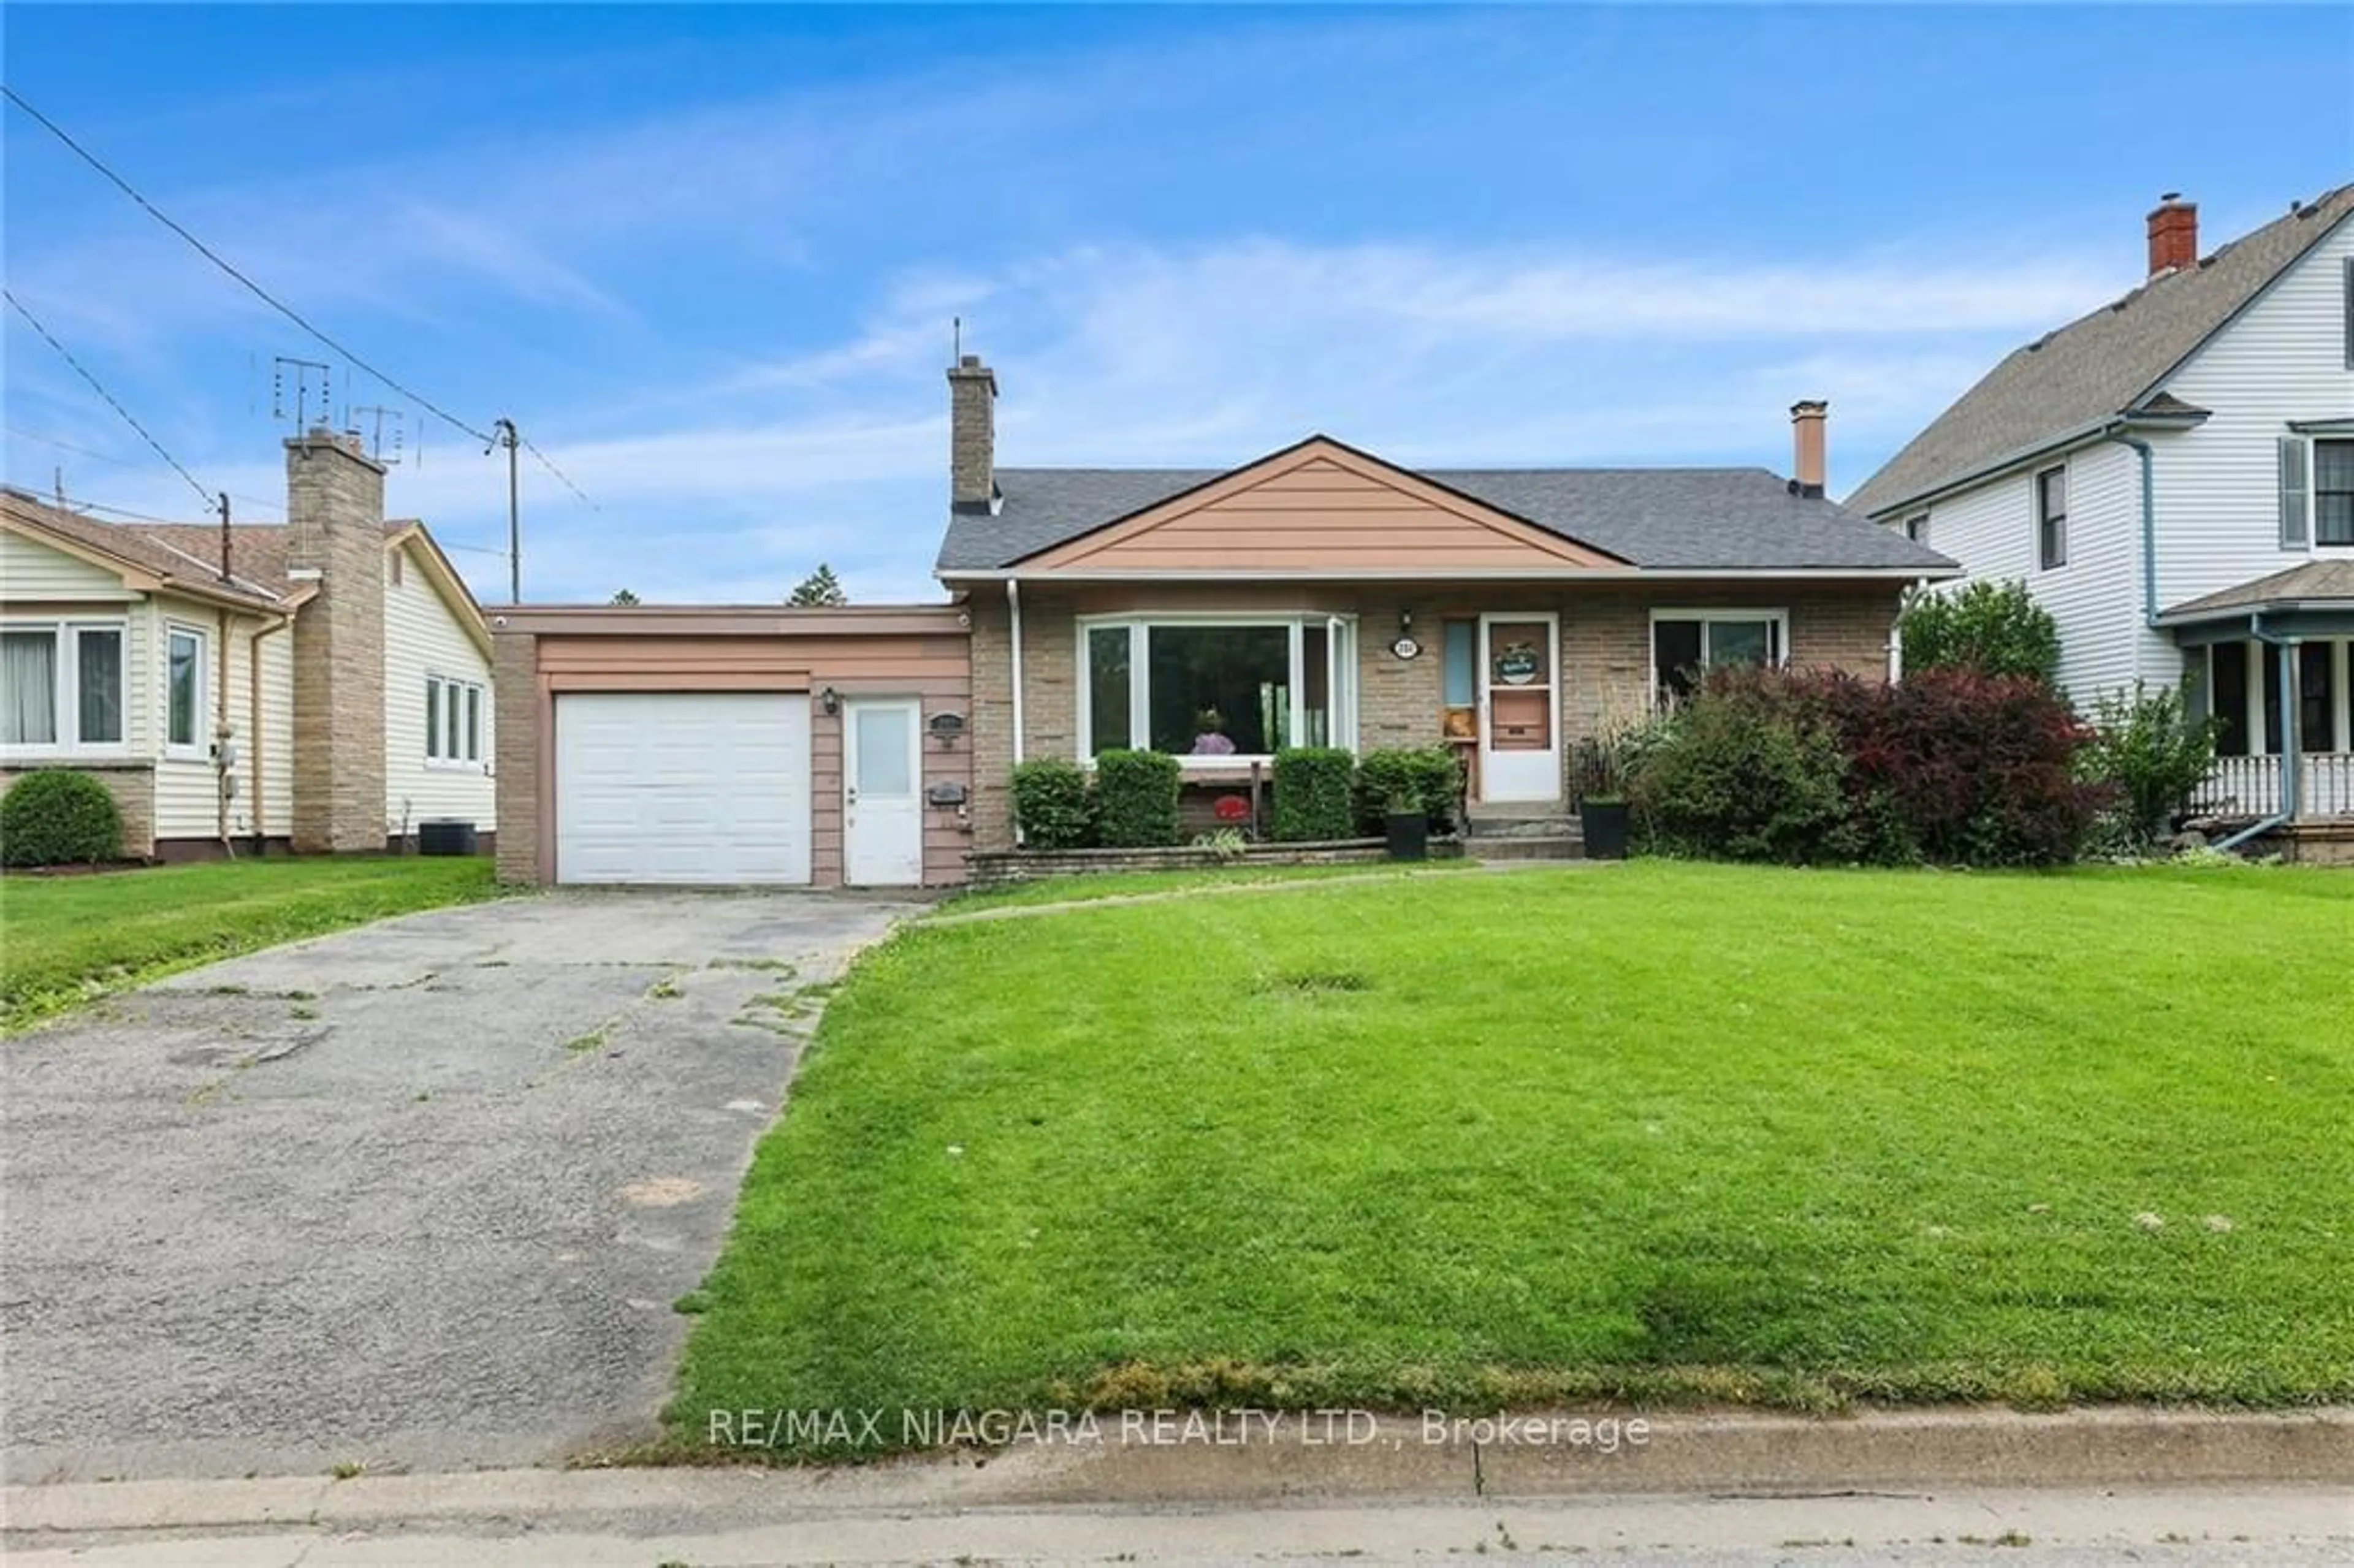 Frontside or backside of a home for 250 Bowen Rd, Fort Erie Ontario L2A 2Y8